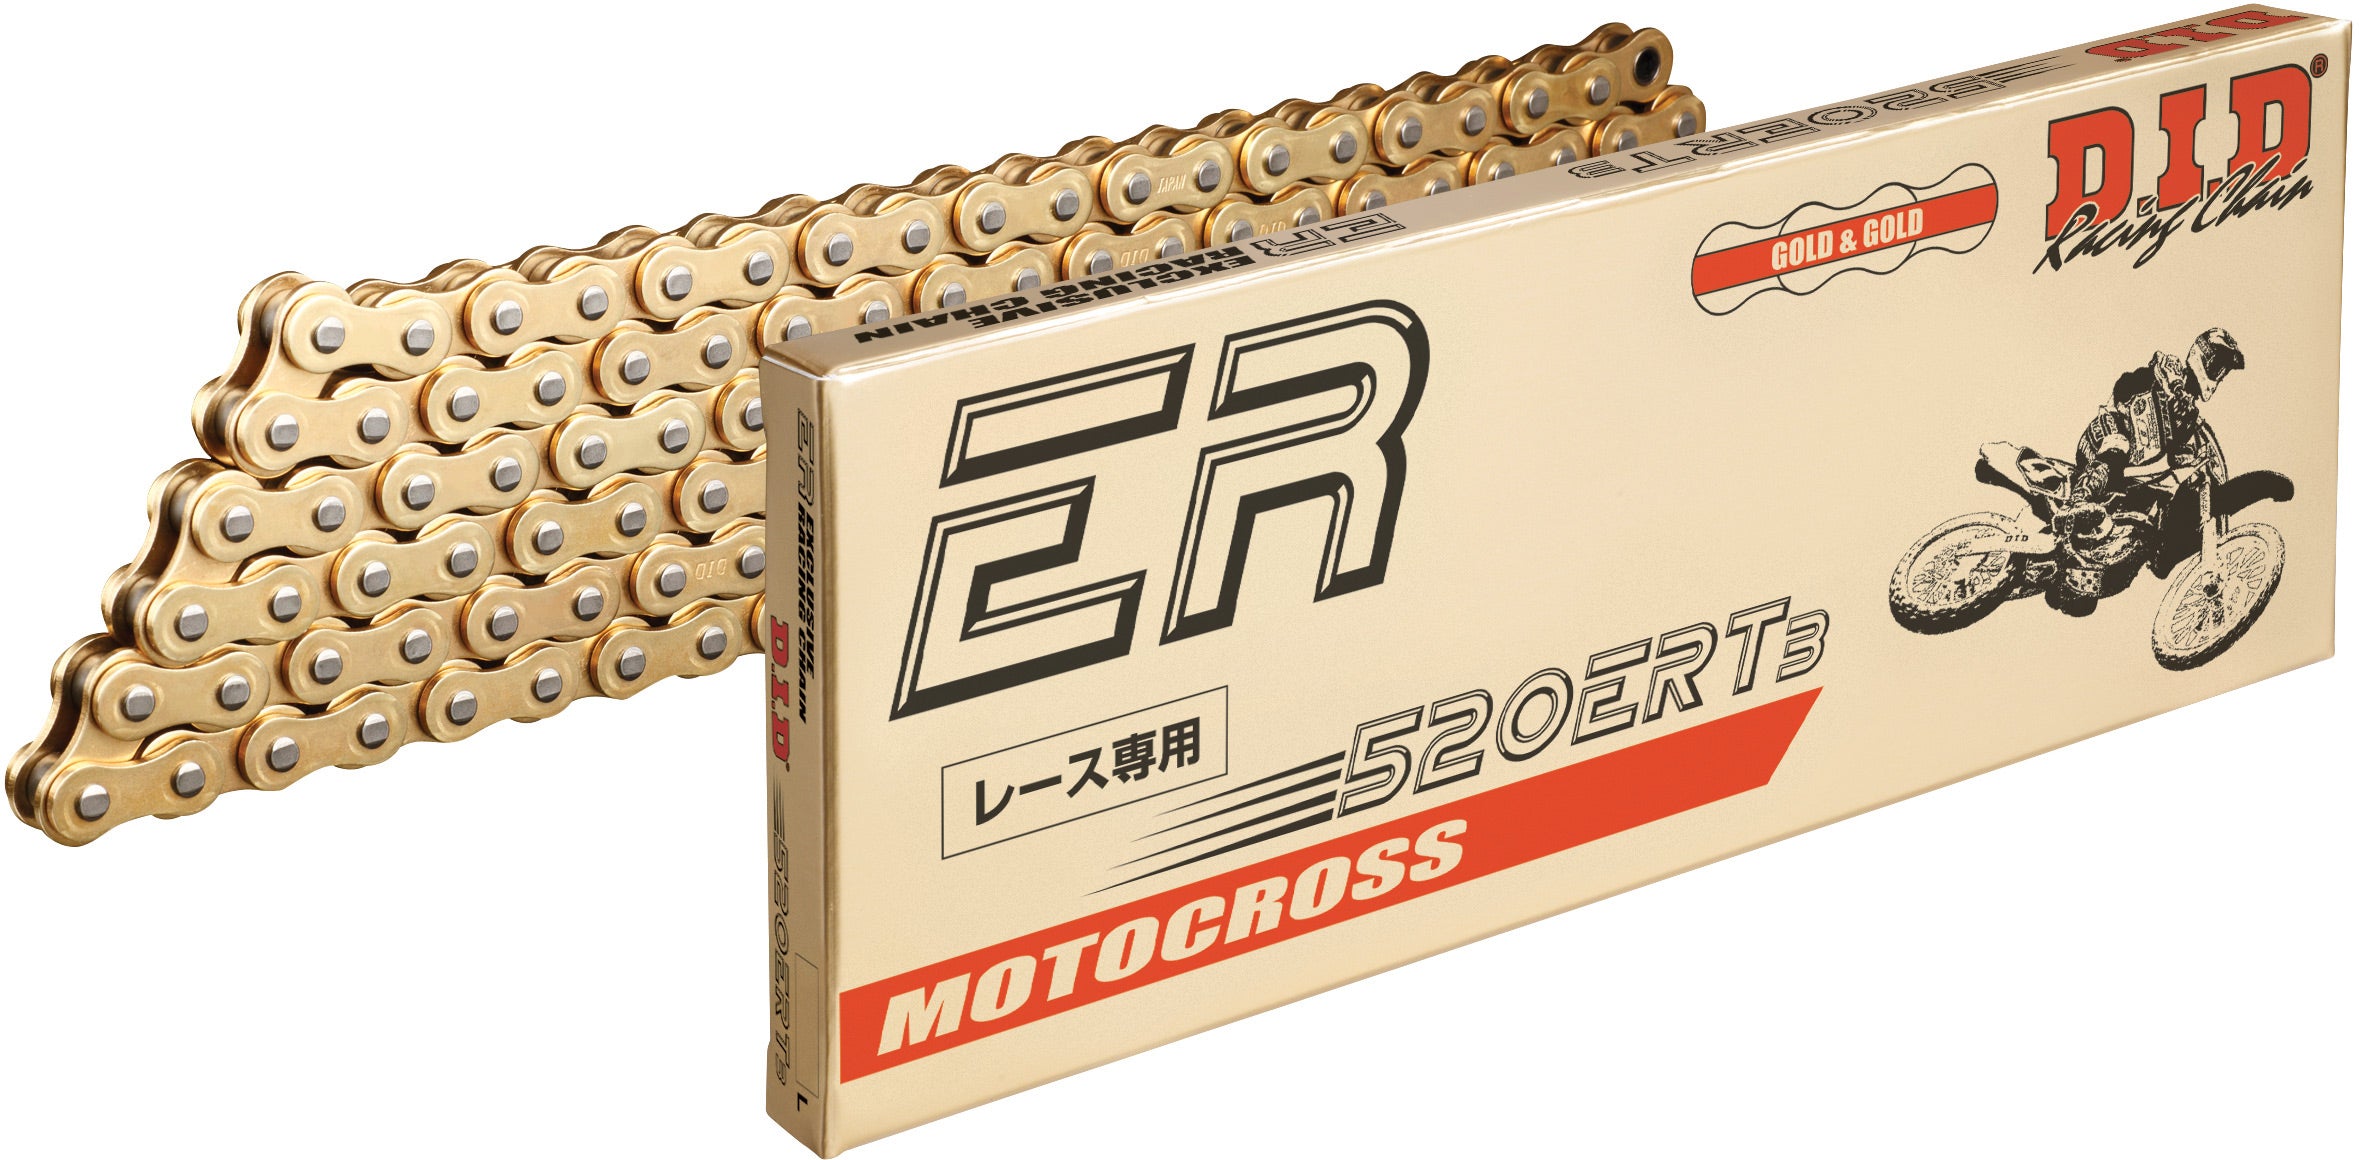 520 ERT3 Gold and Black Chain, 120 Link, High-Performance Motorcycle Drive Chain